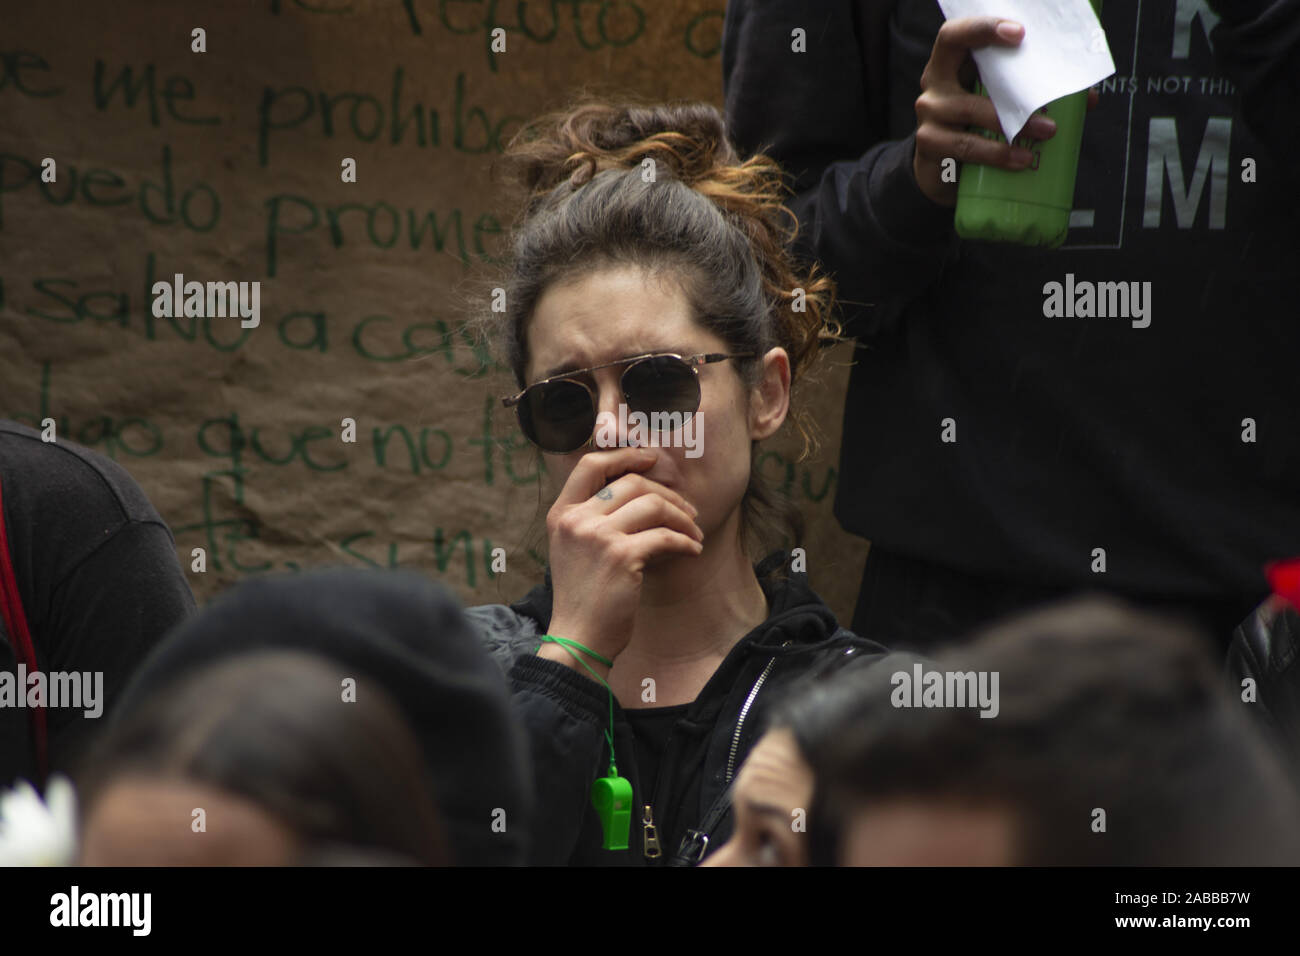 Bogota, Colombia. November 26, 2019: Protestors gather in Bogota in support of the national strike Paro Nacional. November 26th marks the 6th day of protests in the city, and one day after the first civilian death of 18 year old Dilan Cruz. Cruz was shot in the head with a projectile by National Police's anti-riot squad on the corner of Calle 19 with Carrera 4. Credit: Giles Campbell/ZUMA Wire/Alamy Live News Credit: ZUMA Press, Inc./Alamy Live News Stock Photo